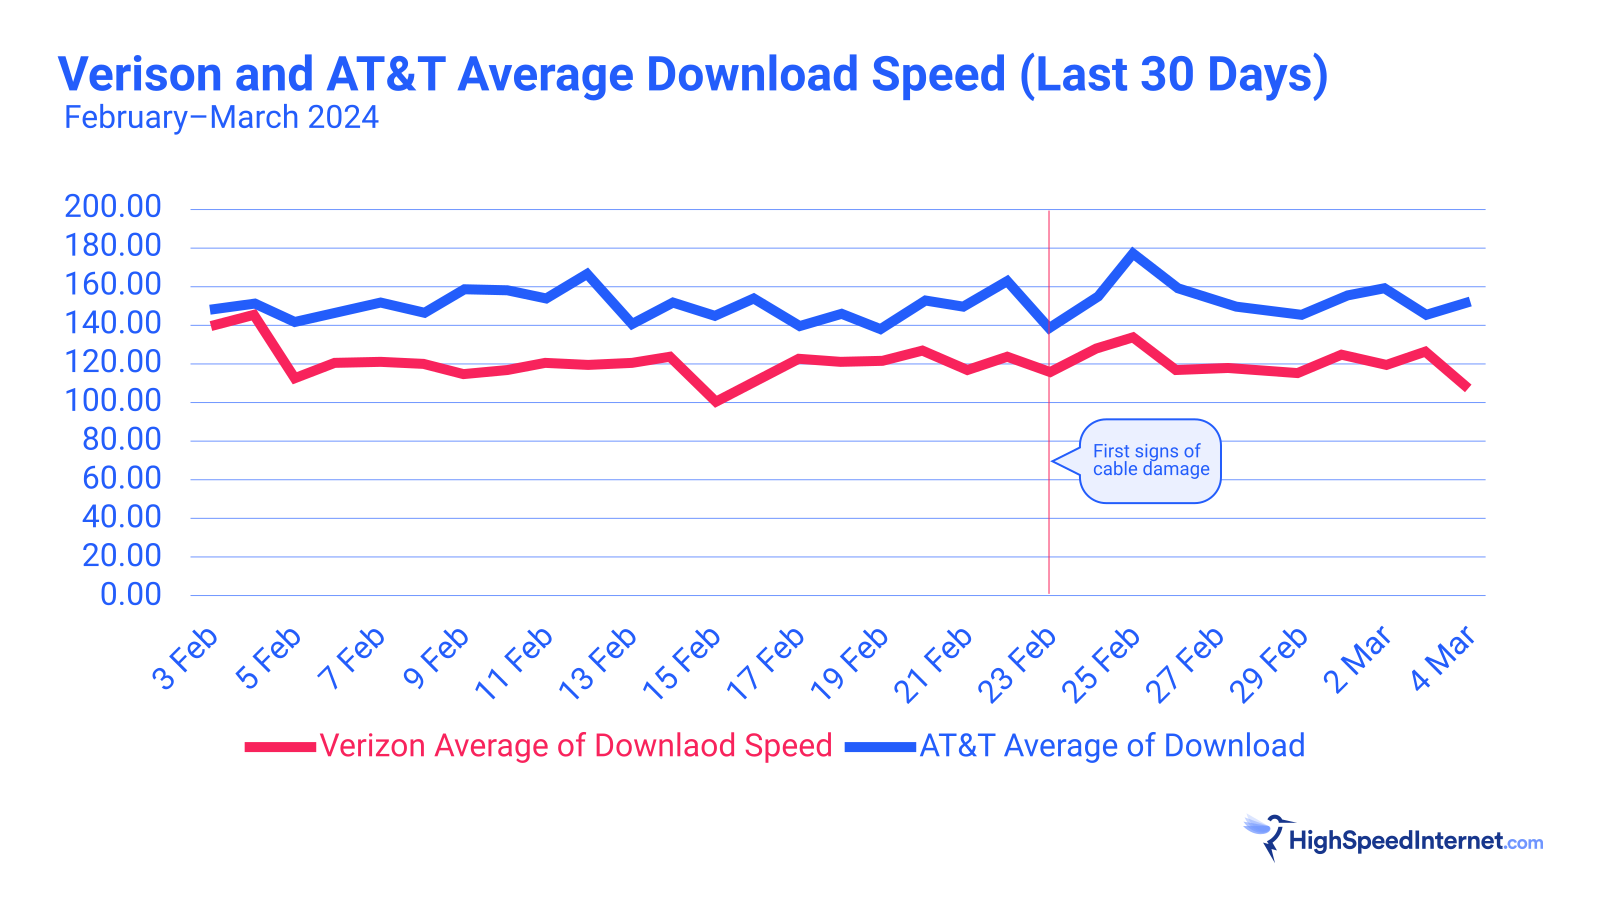 Graph showing average download speeds for Verizon and AT&T